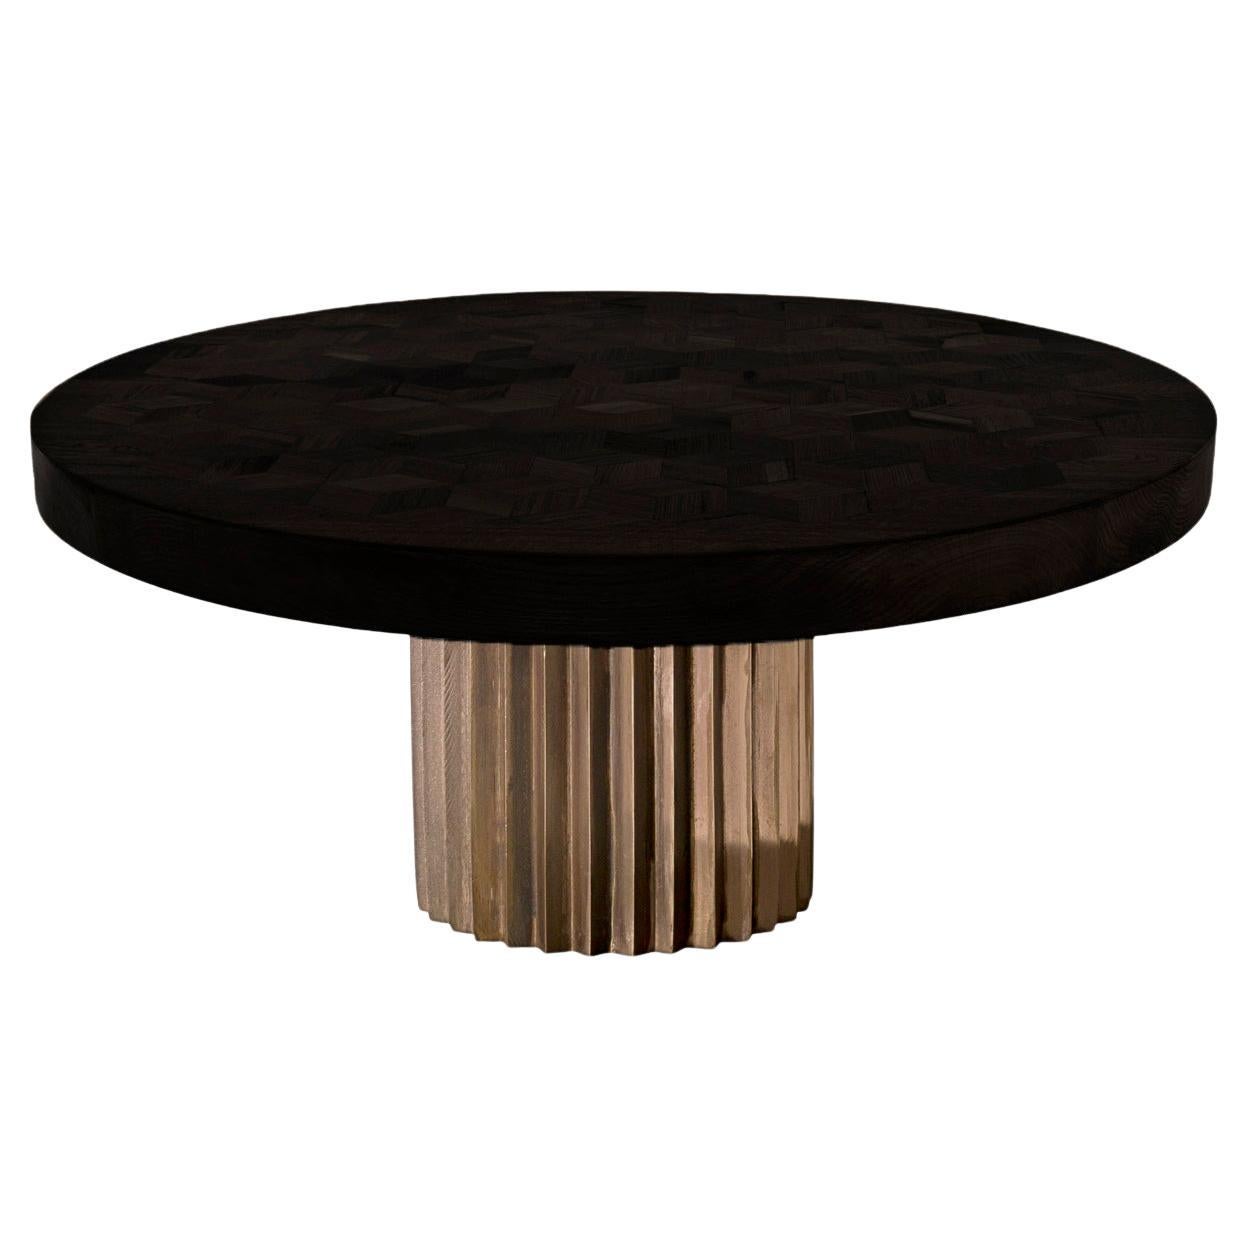 Doris Ebonized Oak Round Dining Table by Fred and Juul